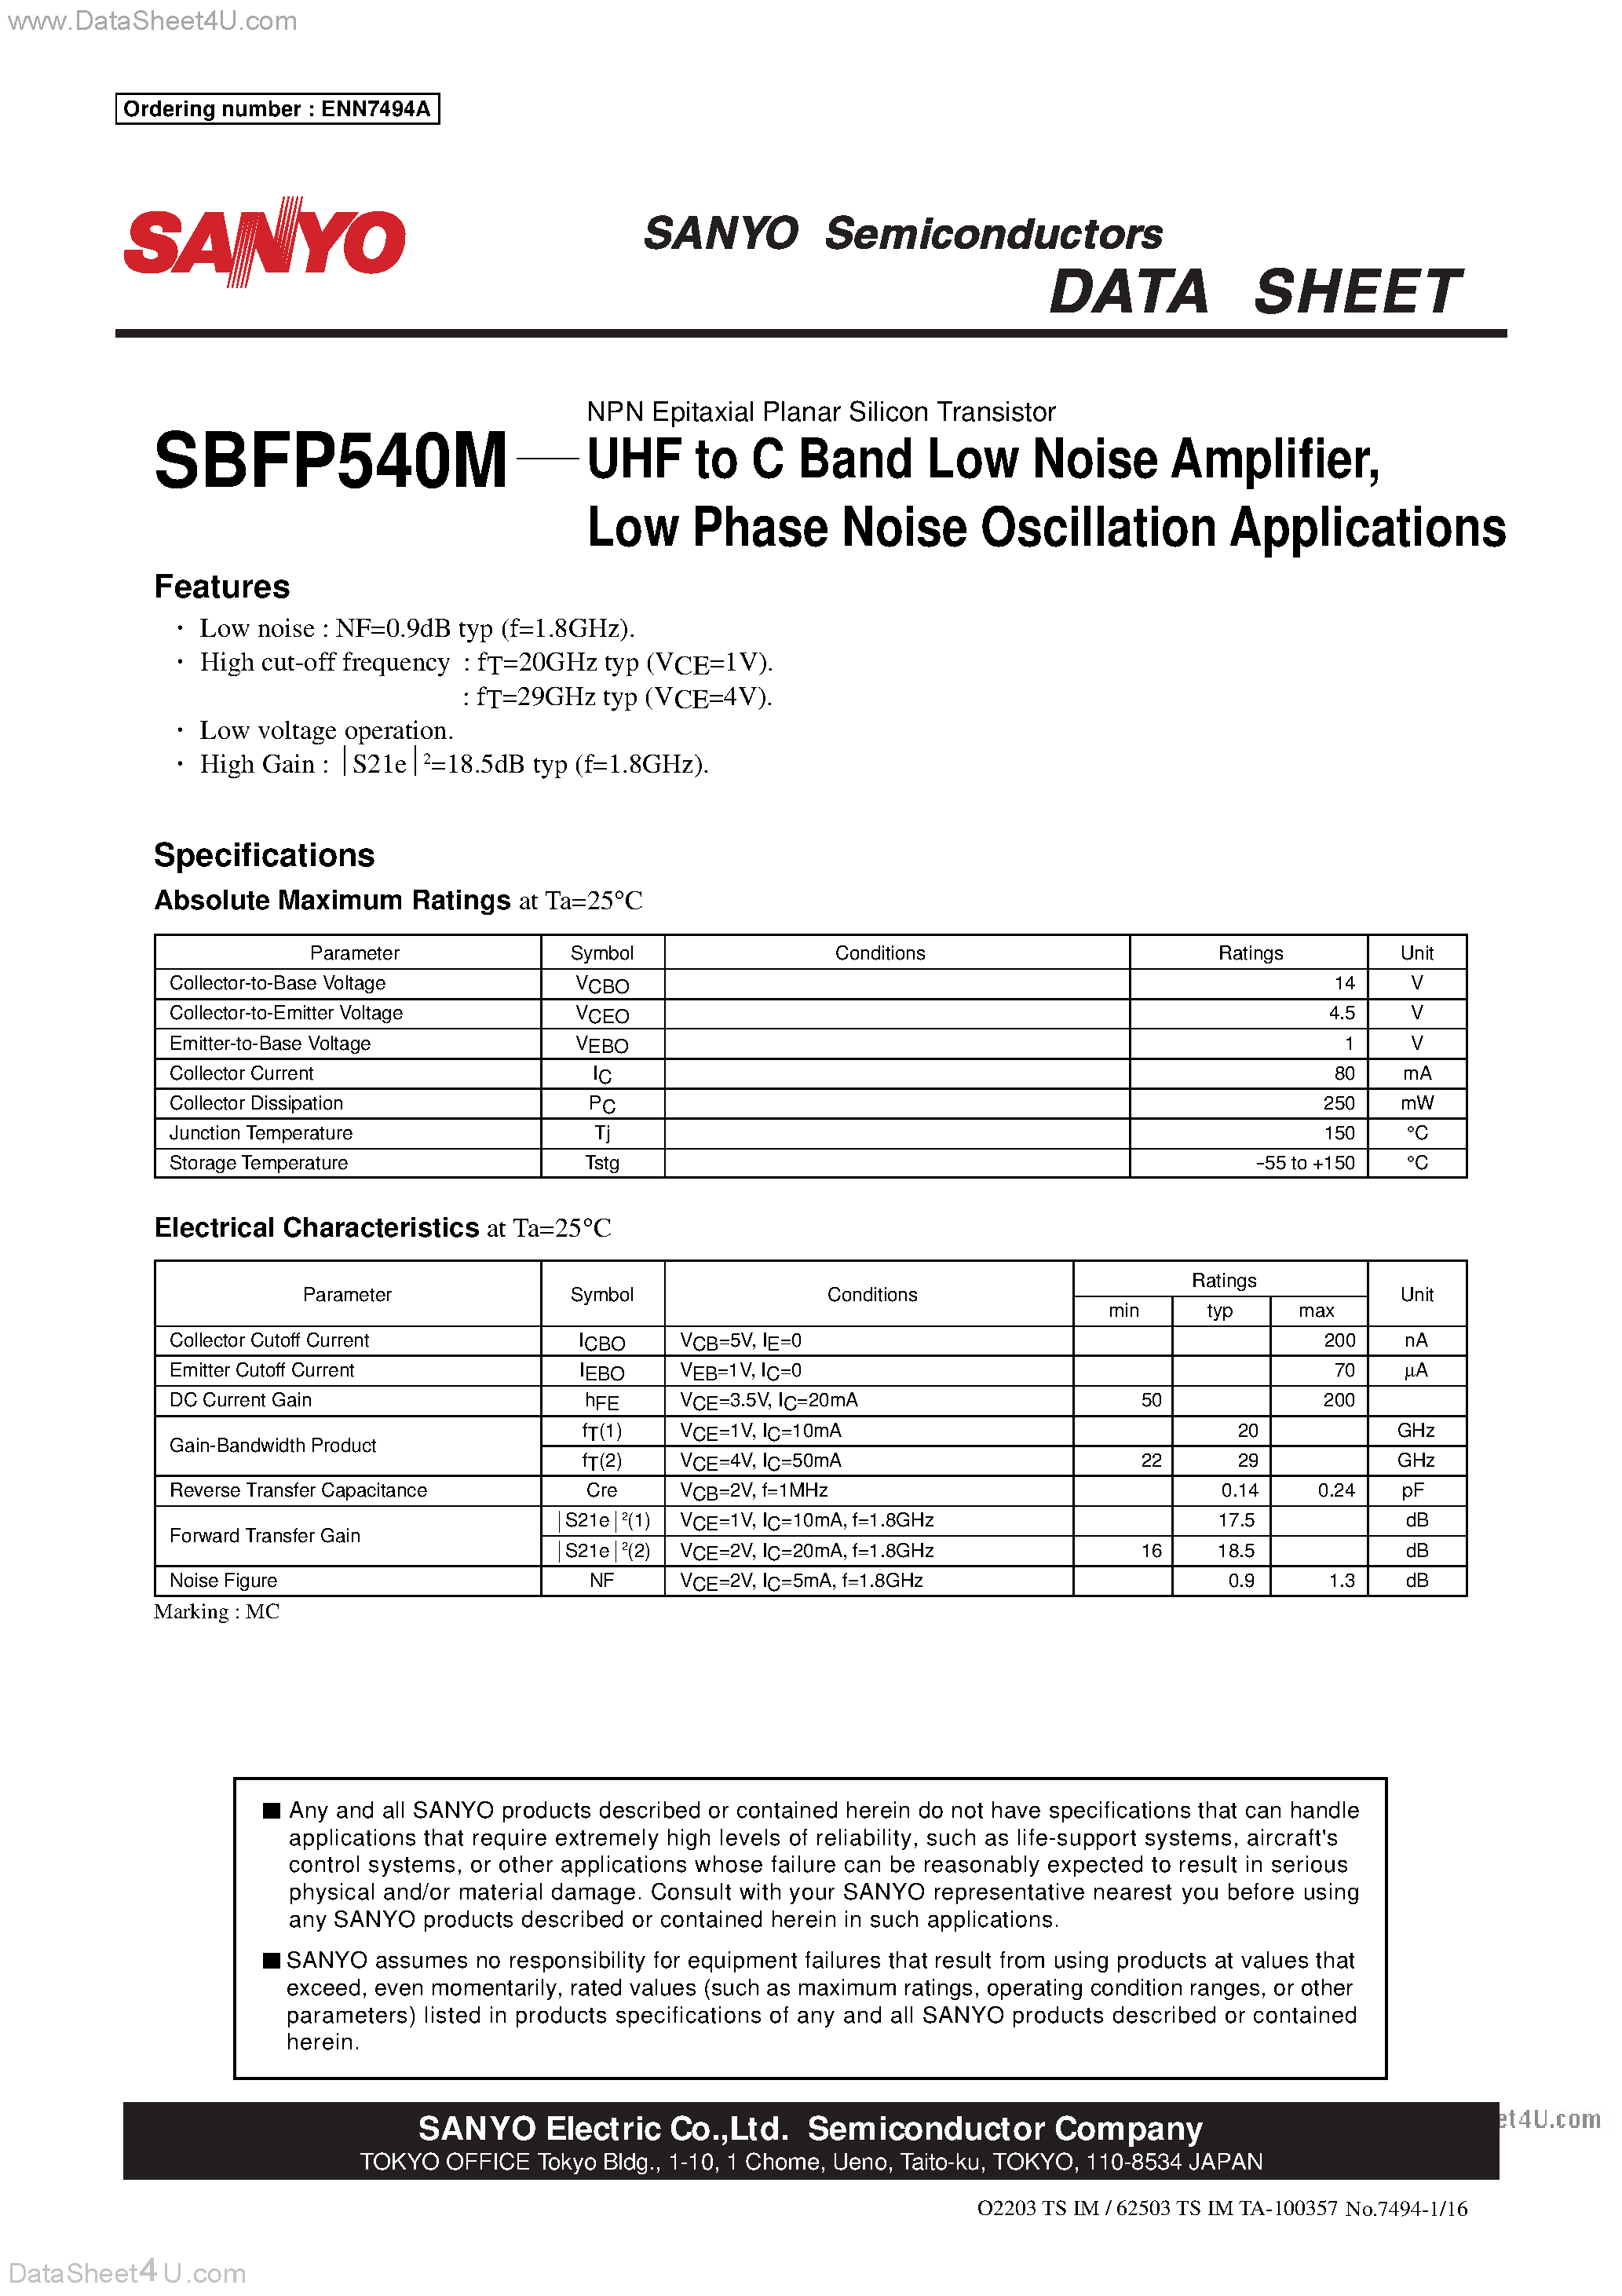 Даташит SBFP540M - UHF to C Band Low Noise Amplifier страница 1